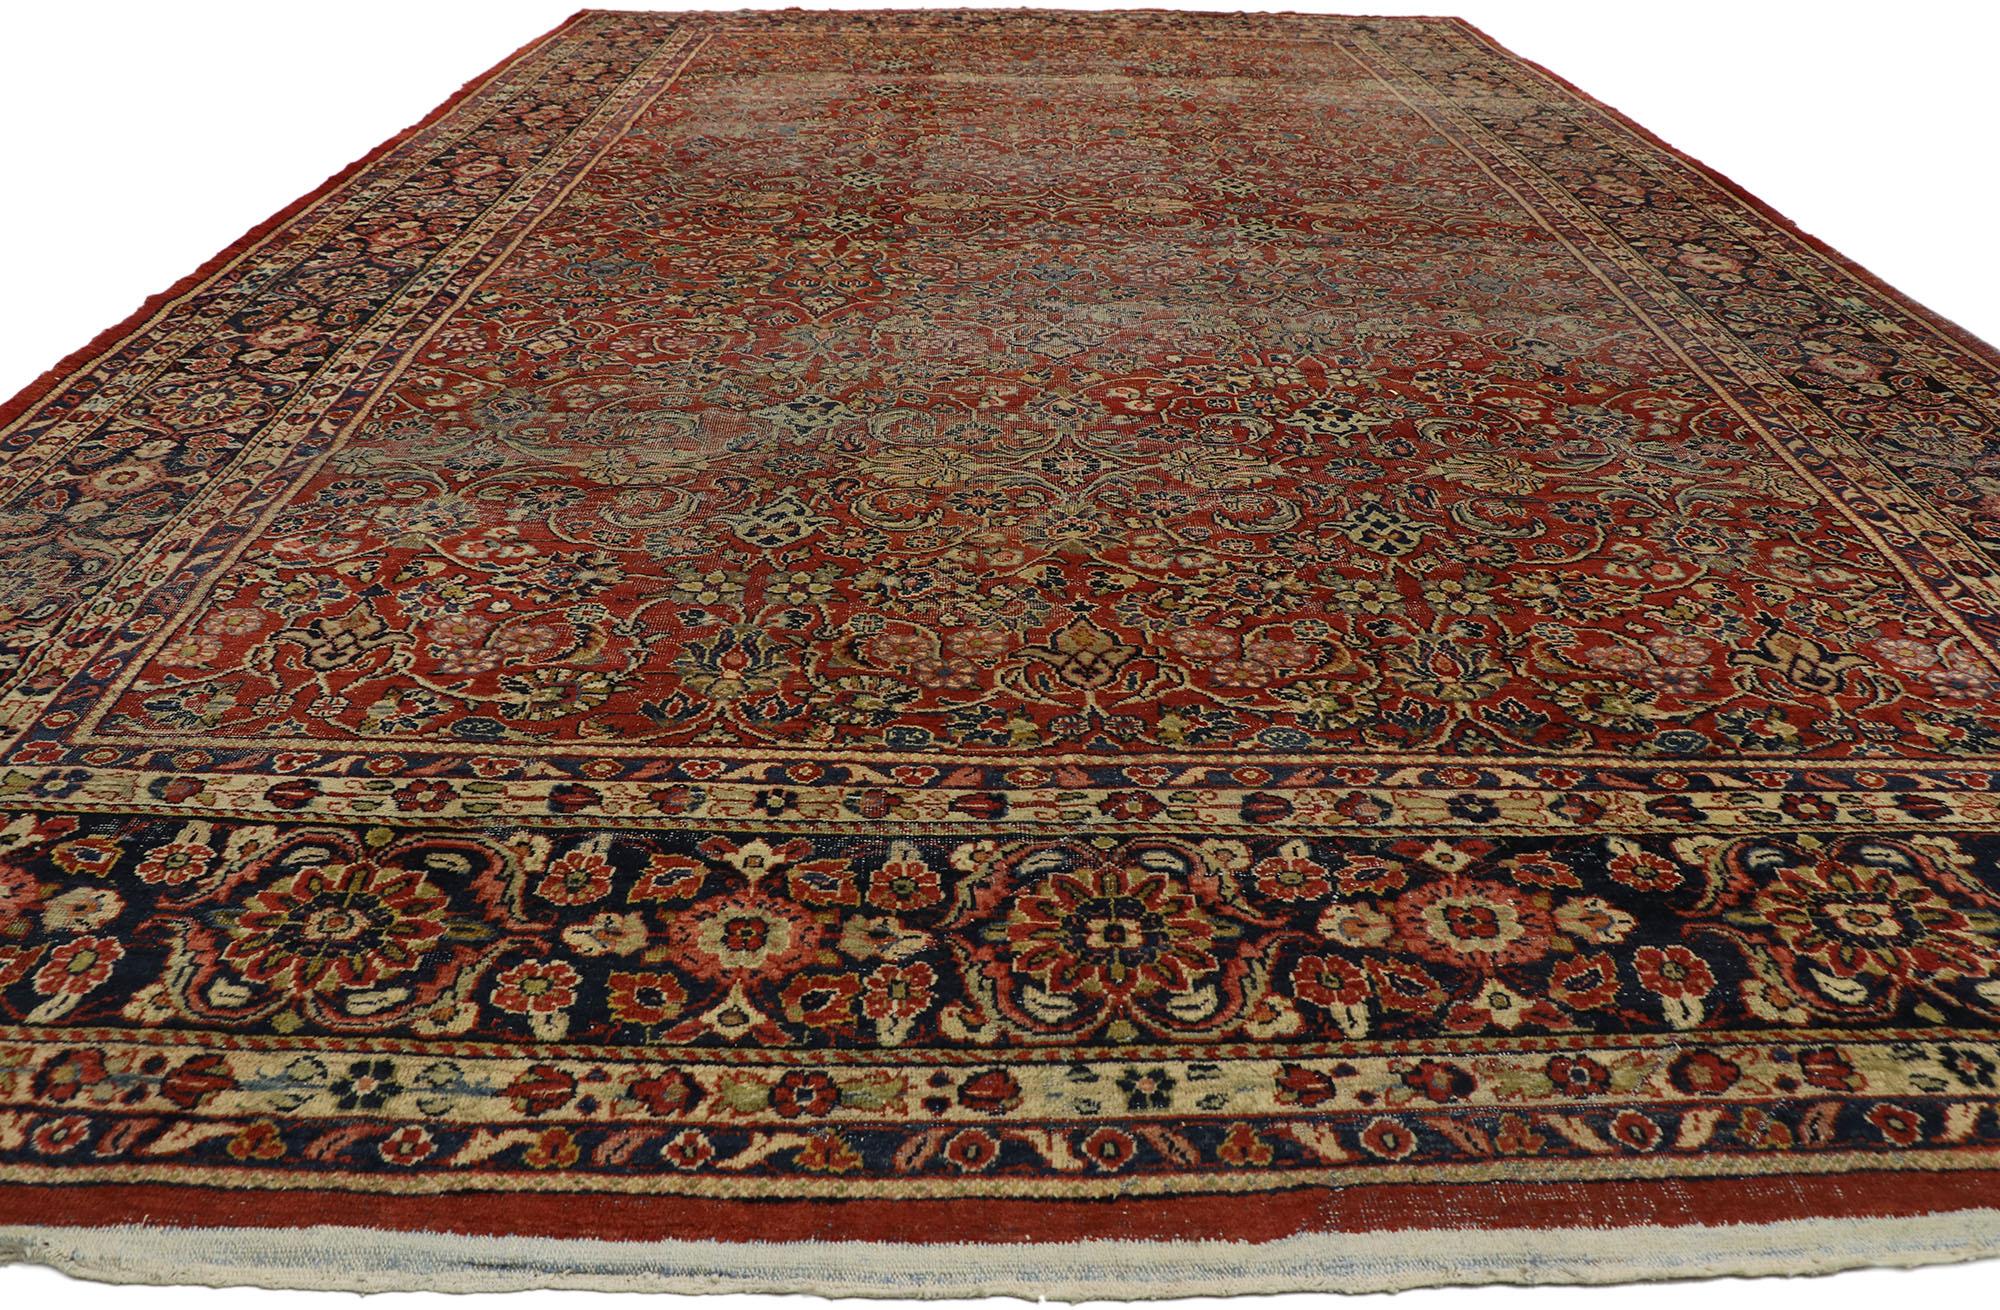 Distressed Antique Persian Mahal Rug with Modern Rustic English Style In Distressed Condition For Sale In Dallas, TX